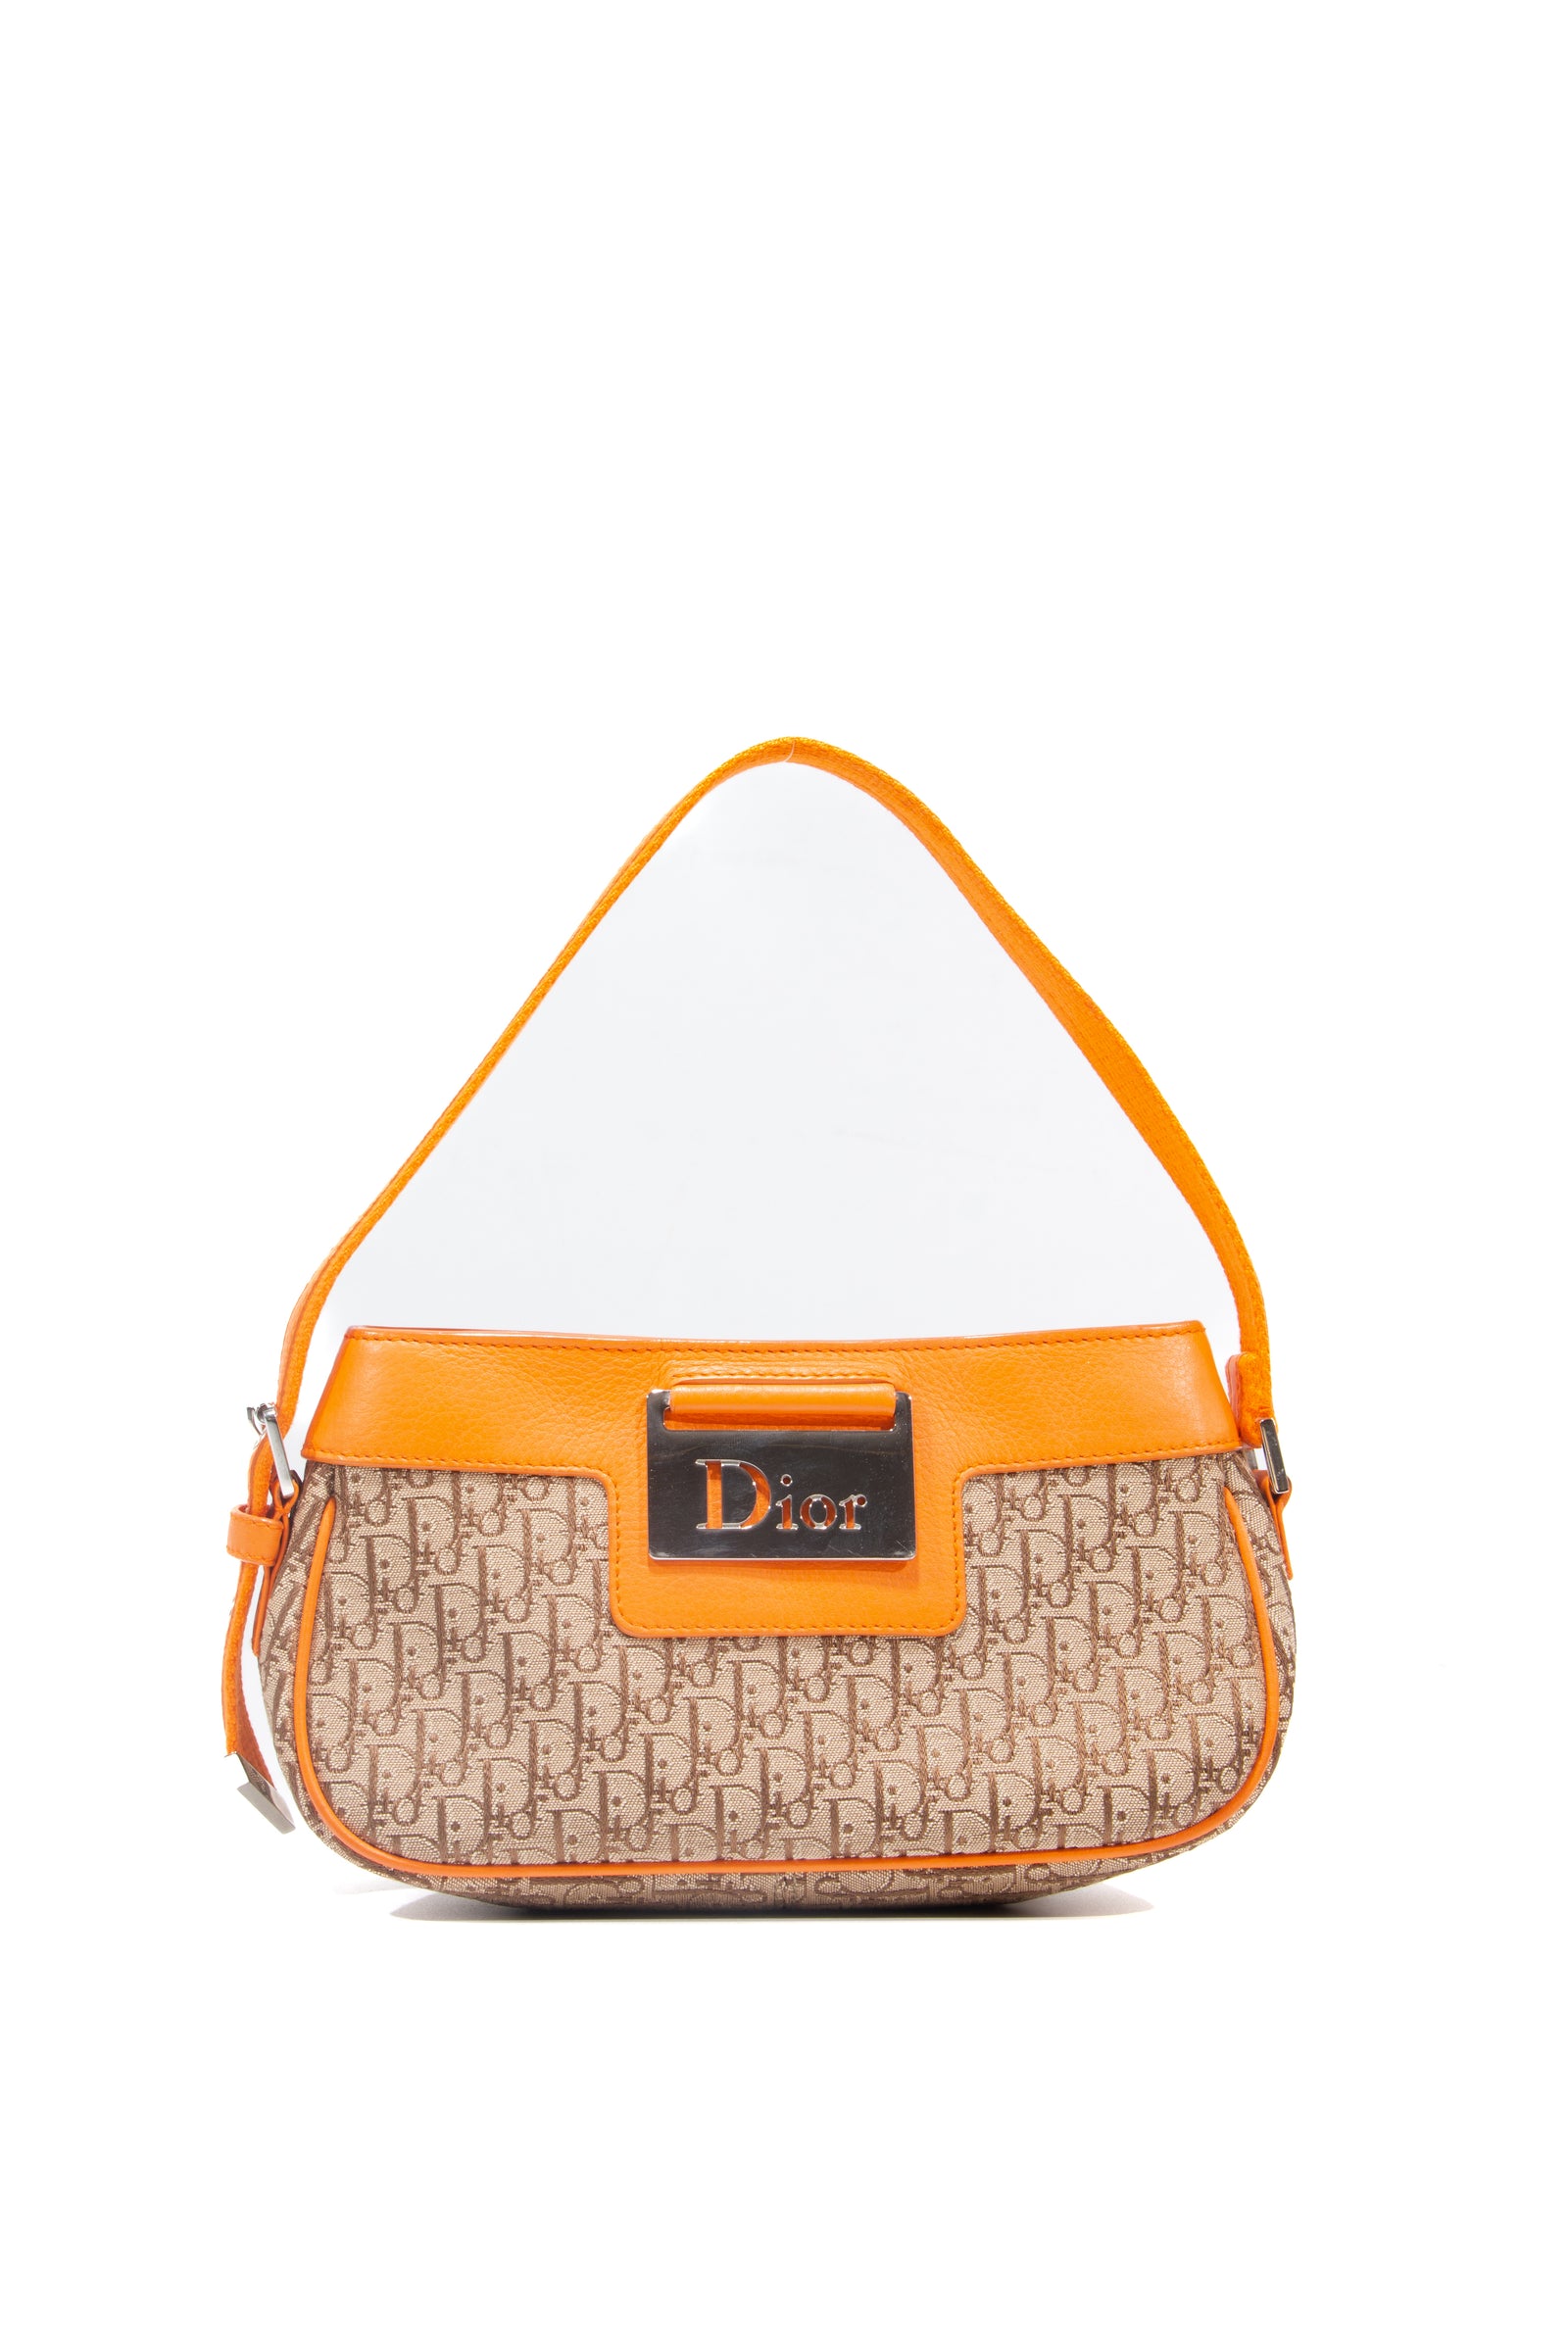 dior saddle On Sale - Authenticated Resale